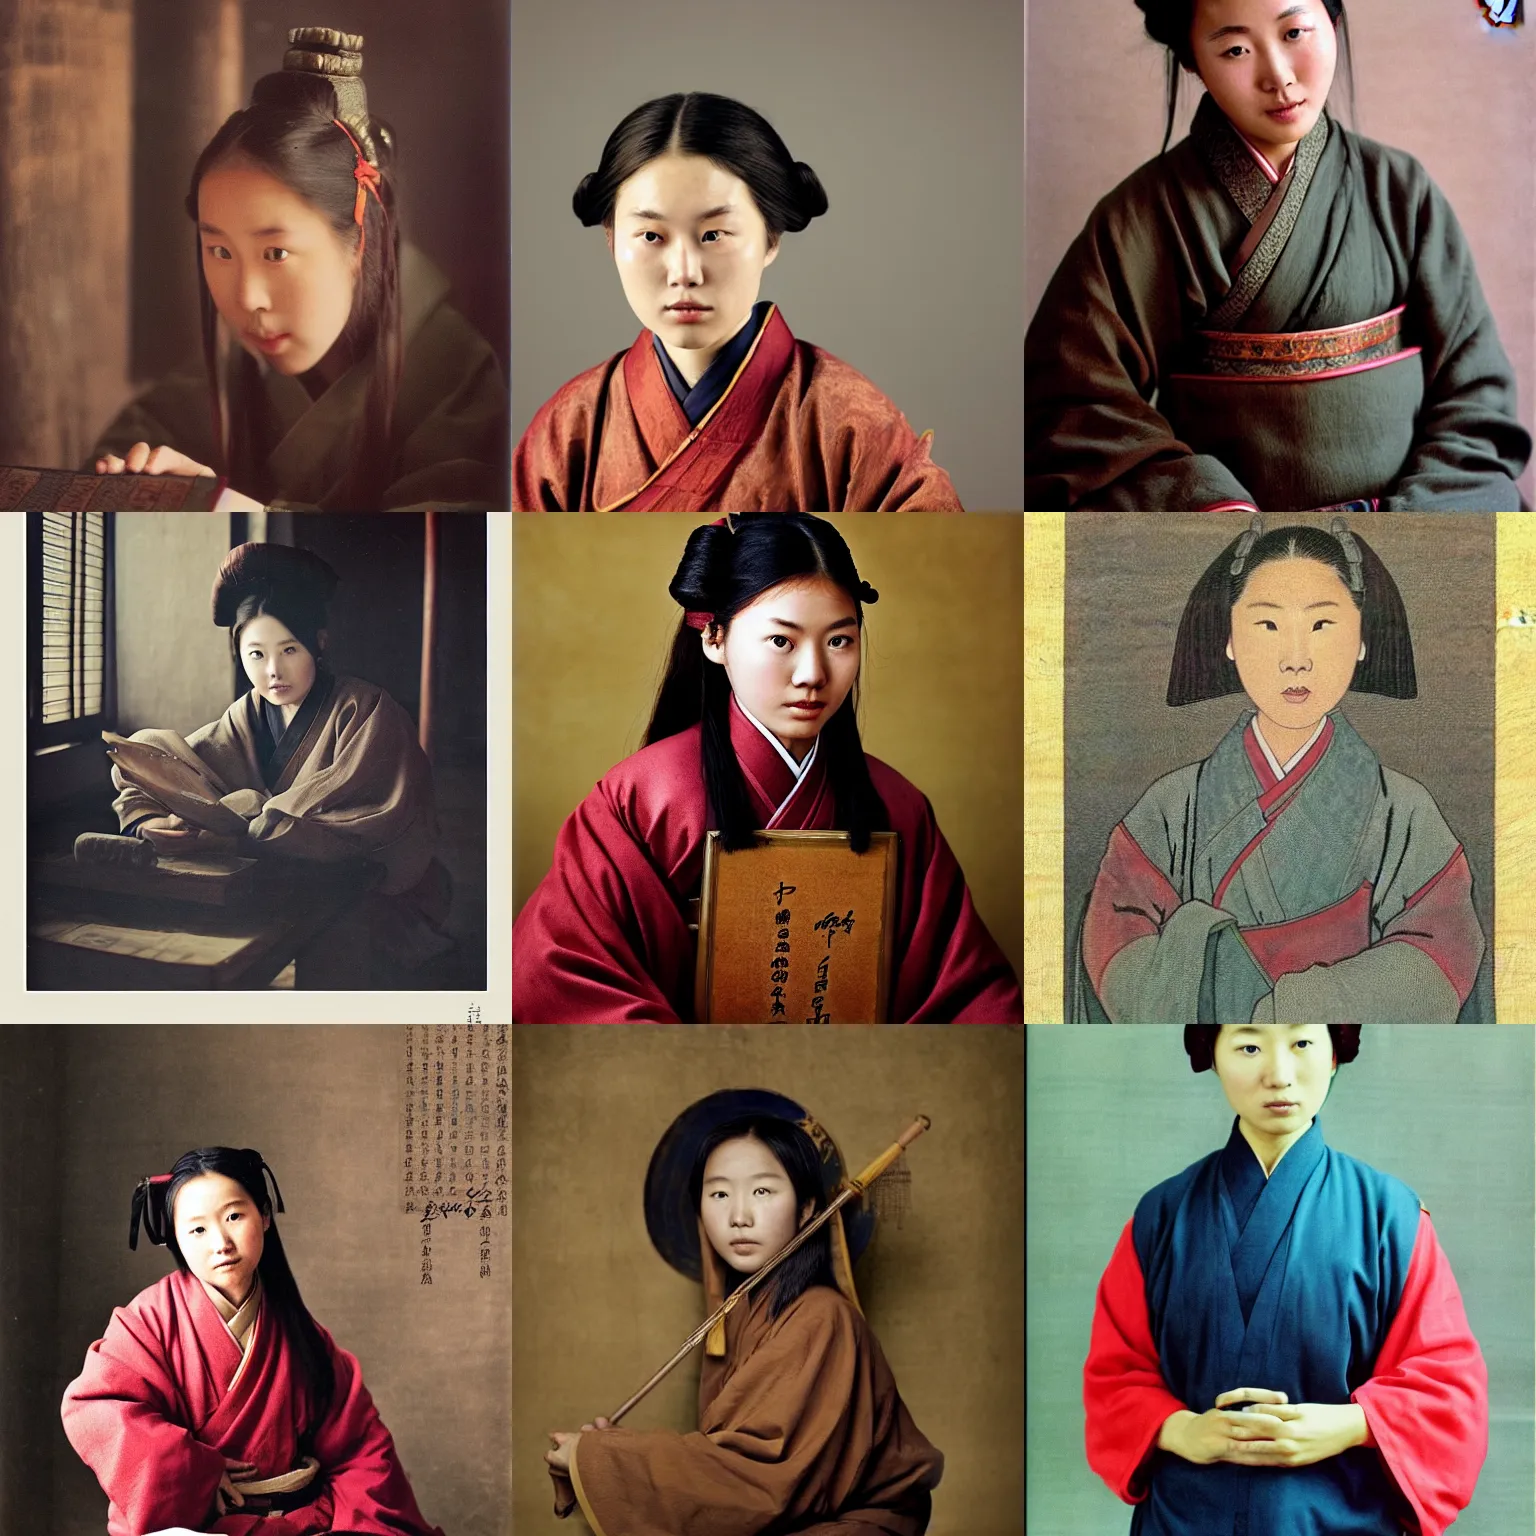 Prompt: Young female Chinese scholar, year 850 AD, photography by Annie Leibovitz